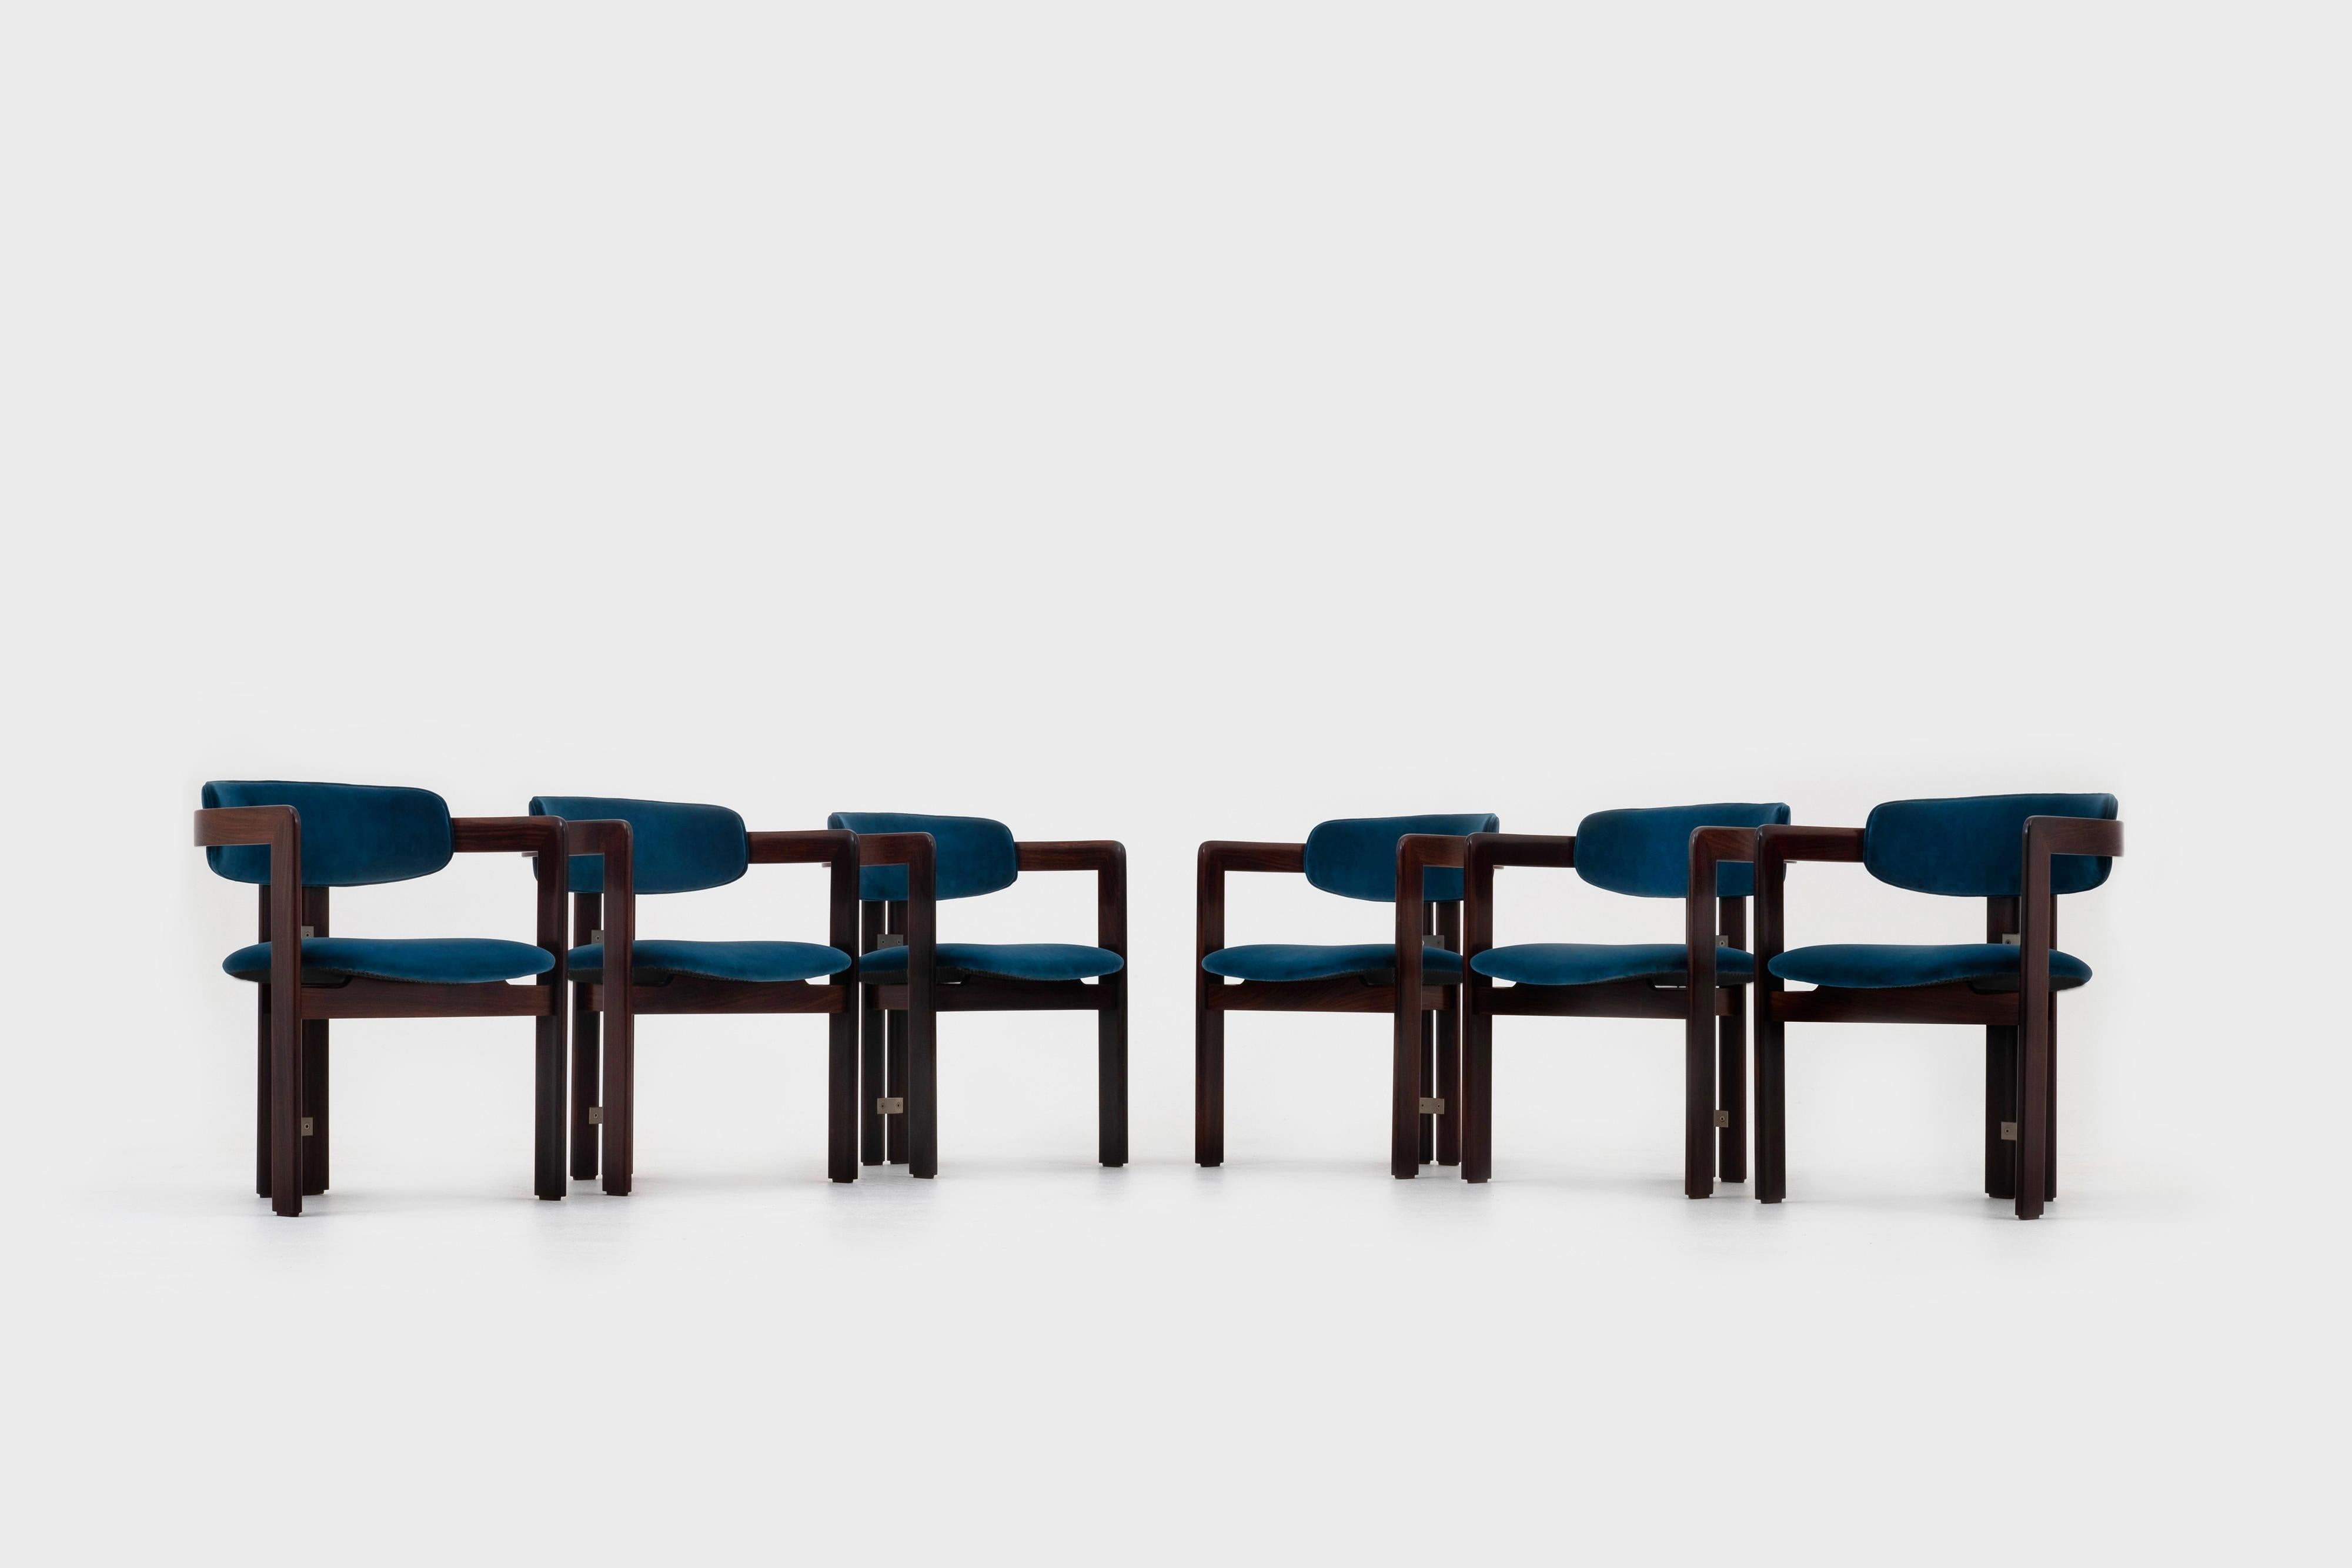 Set of six 'Pamplona' dining chairs by Augusto Savini for Pozzi, Italy, 1960s. This is for the rare early model in solid rosewood. By far the most beautiful and luxurious model. The chairs have a strong sculptural design with beautiful details such